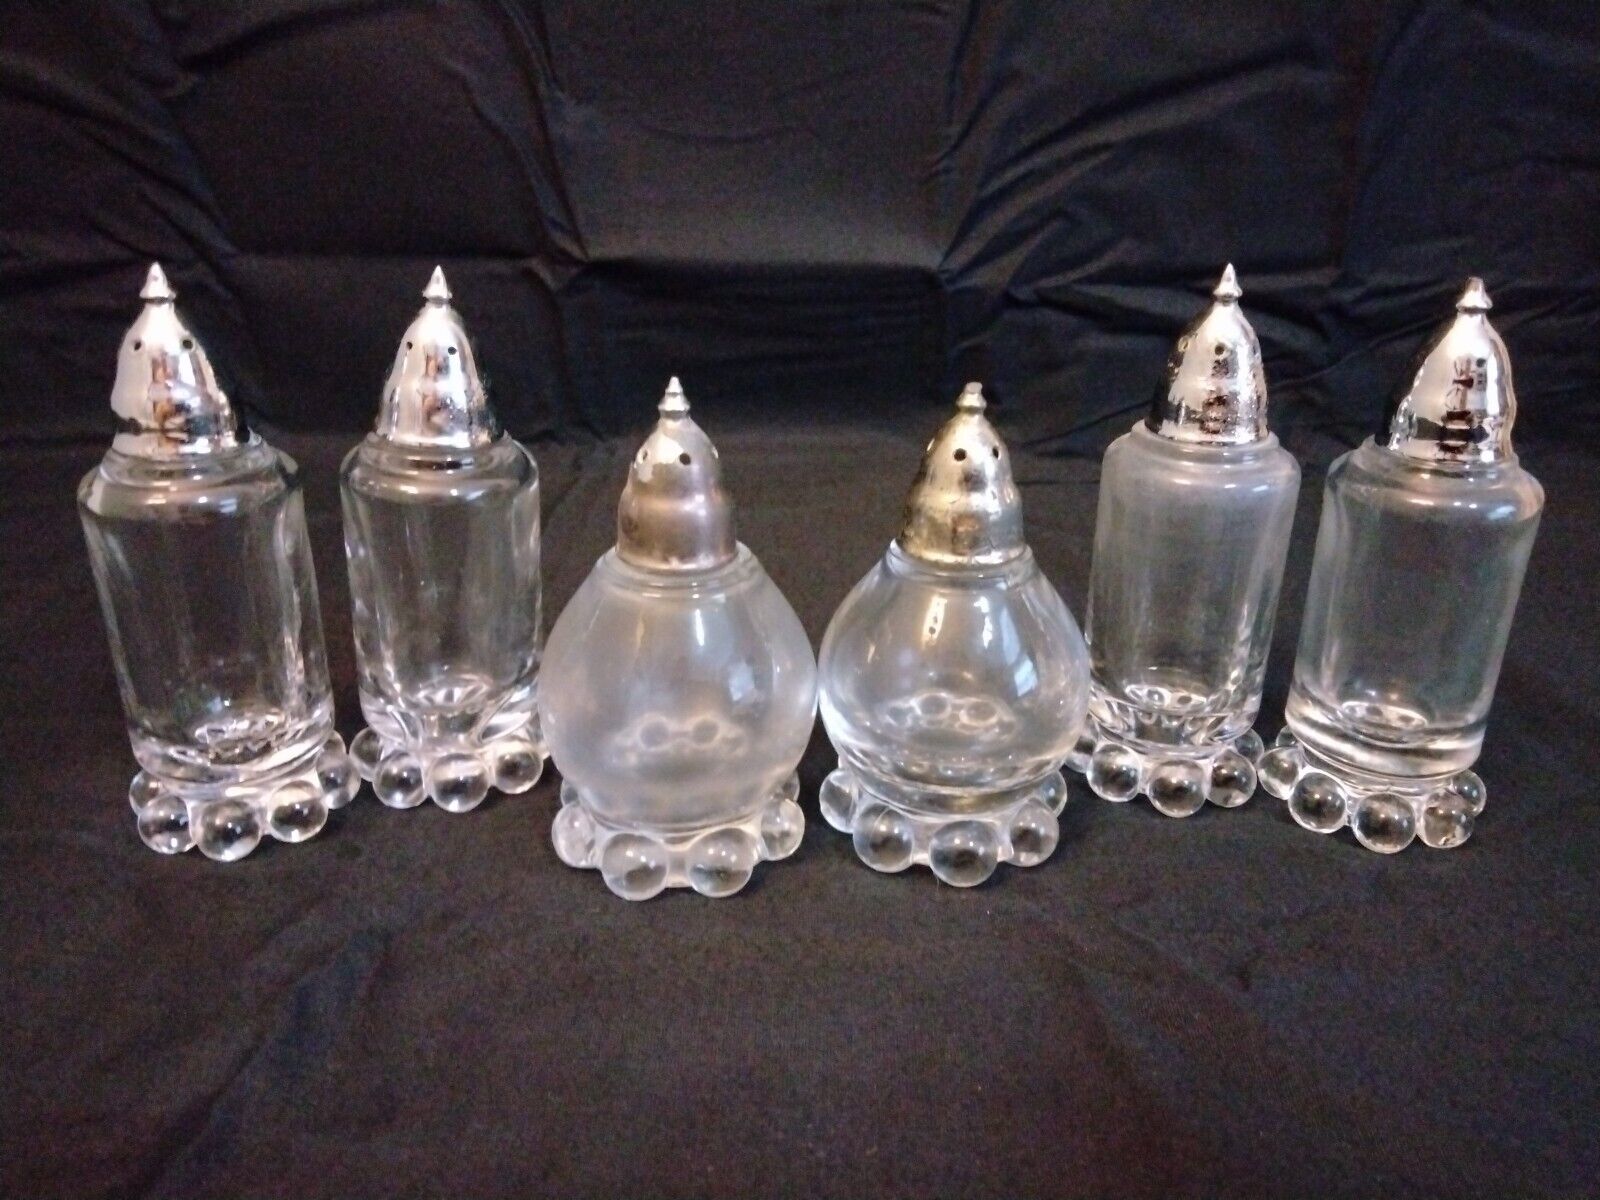 Vintage Imperial Glass Candlewick Salt and Pepper Shakers - 3 Sets